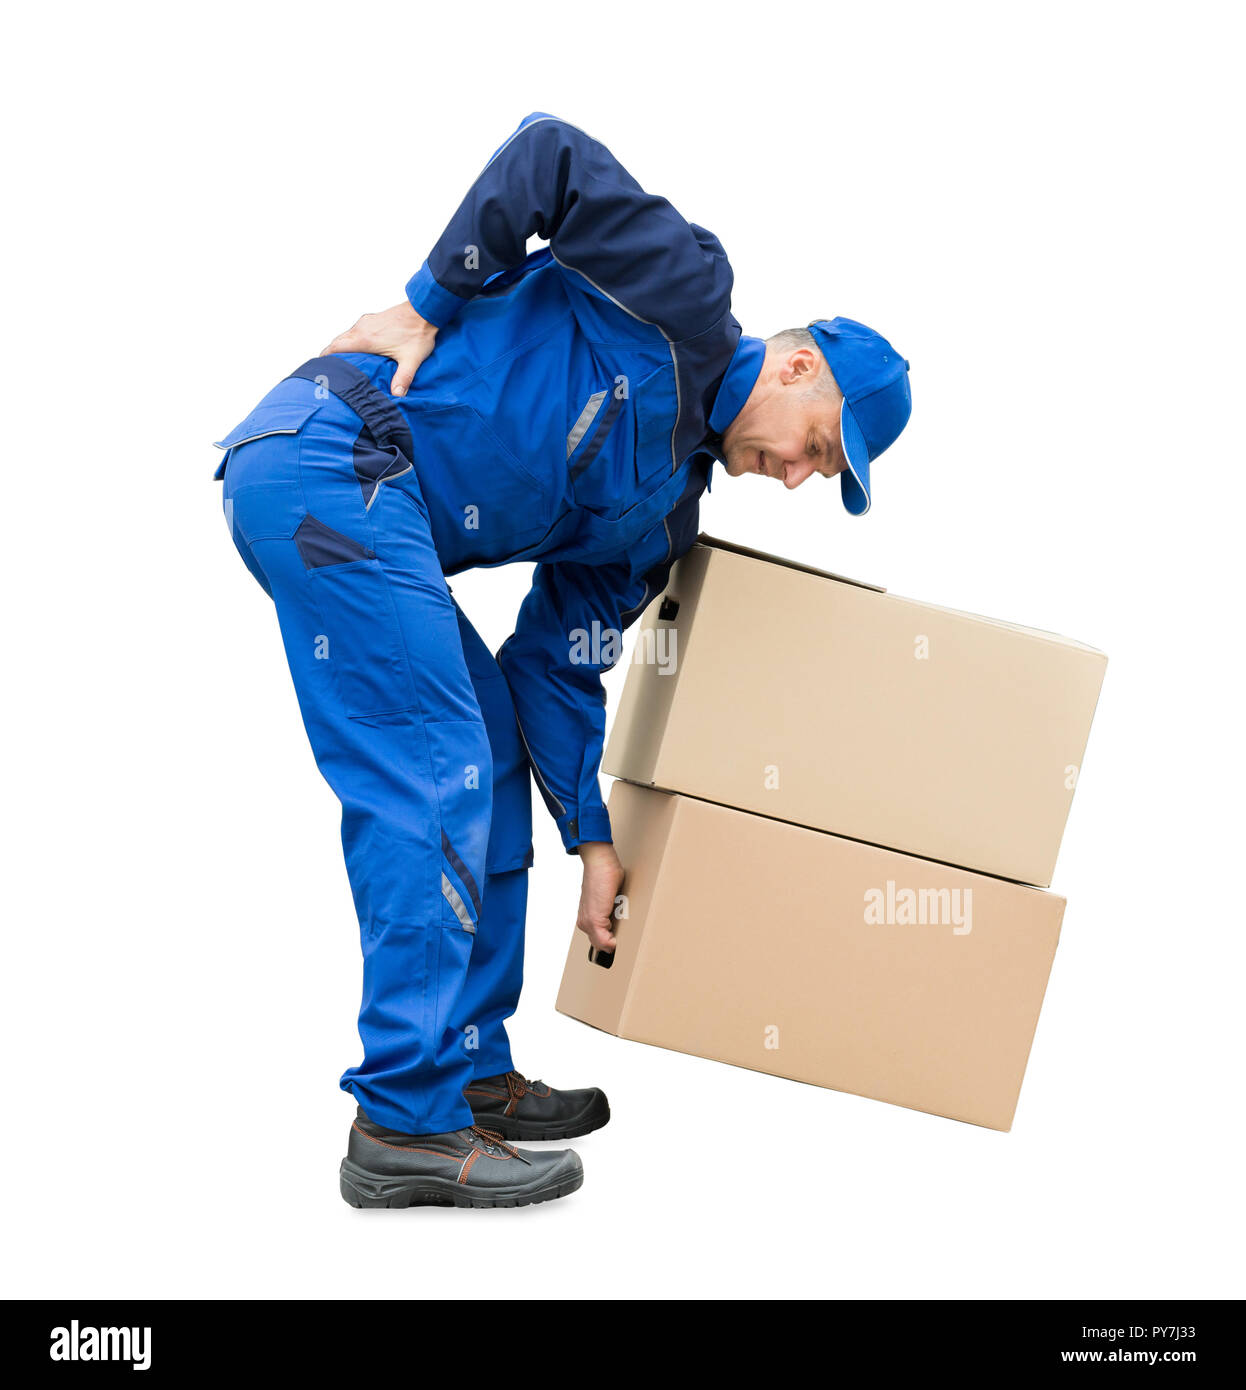 Mature Delivery Man Suffering From Back Pain While Lifting Cardboard Boxes Over White Background Stock Photo